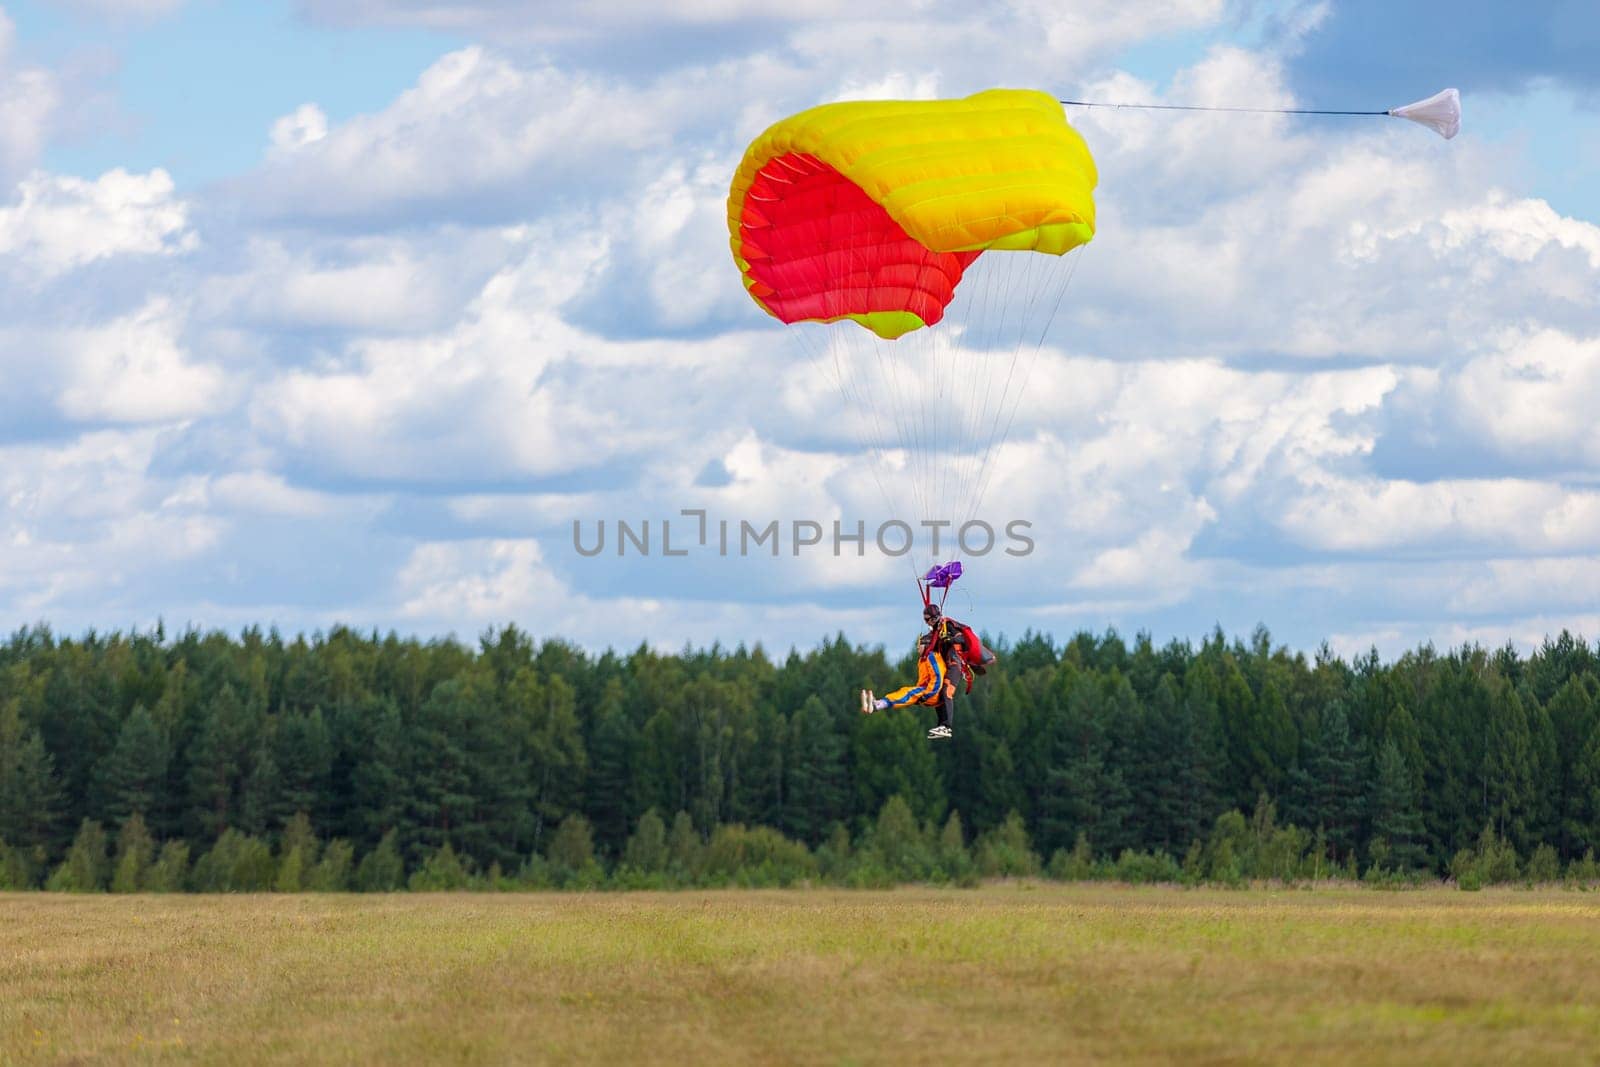 Landing skydivers-athletes with a parachute on the ground. Kirzhach Russia July 22, 2023